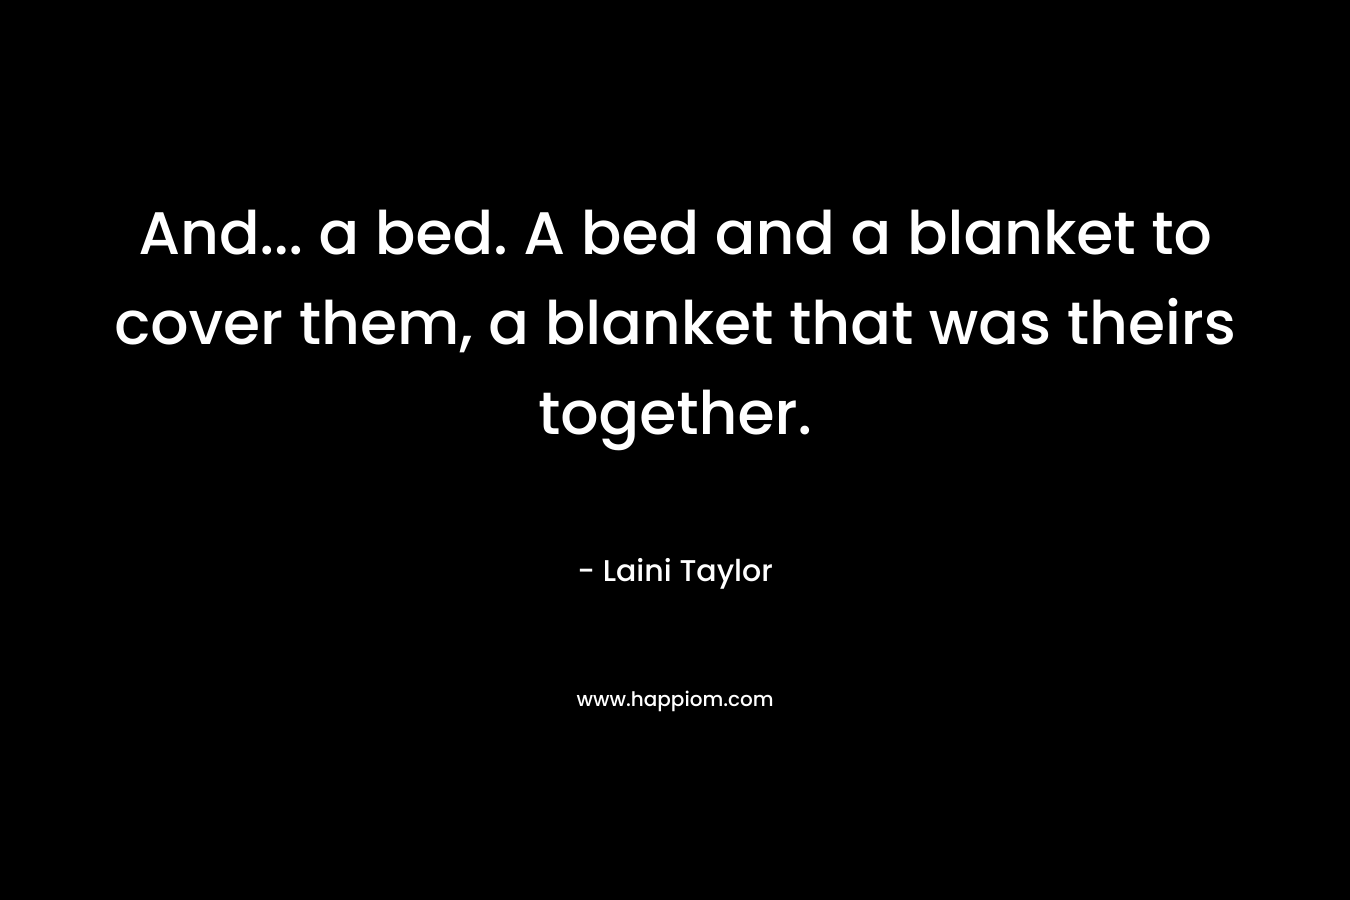 And... a bed. A bed and a blanket to cover them, a blanket that was theirs together.